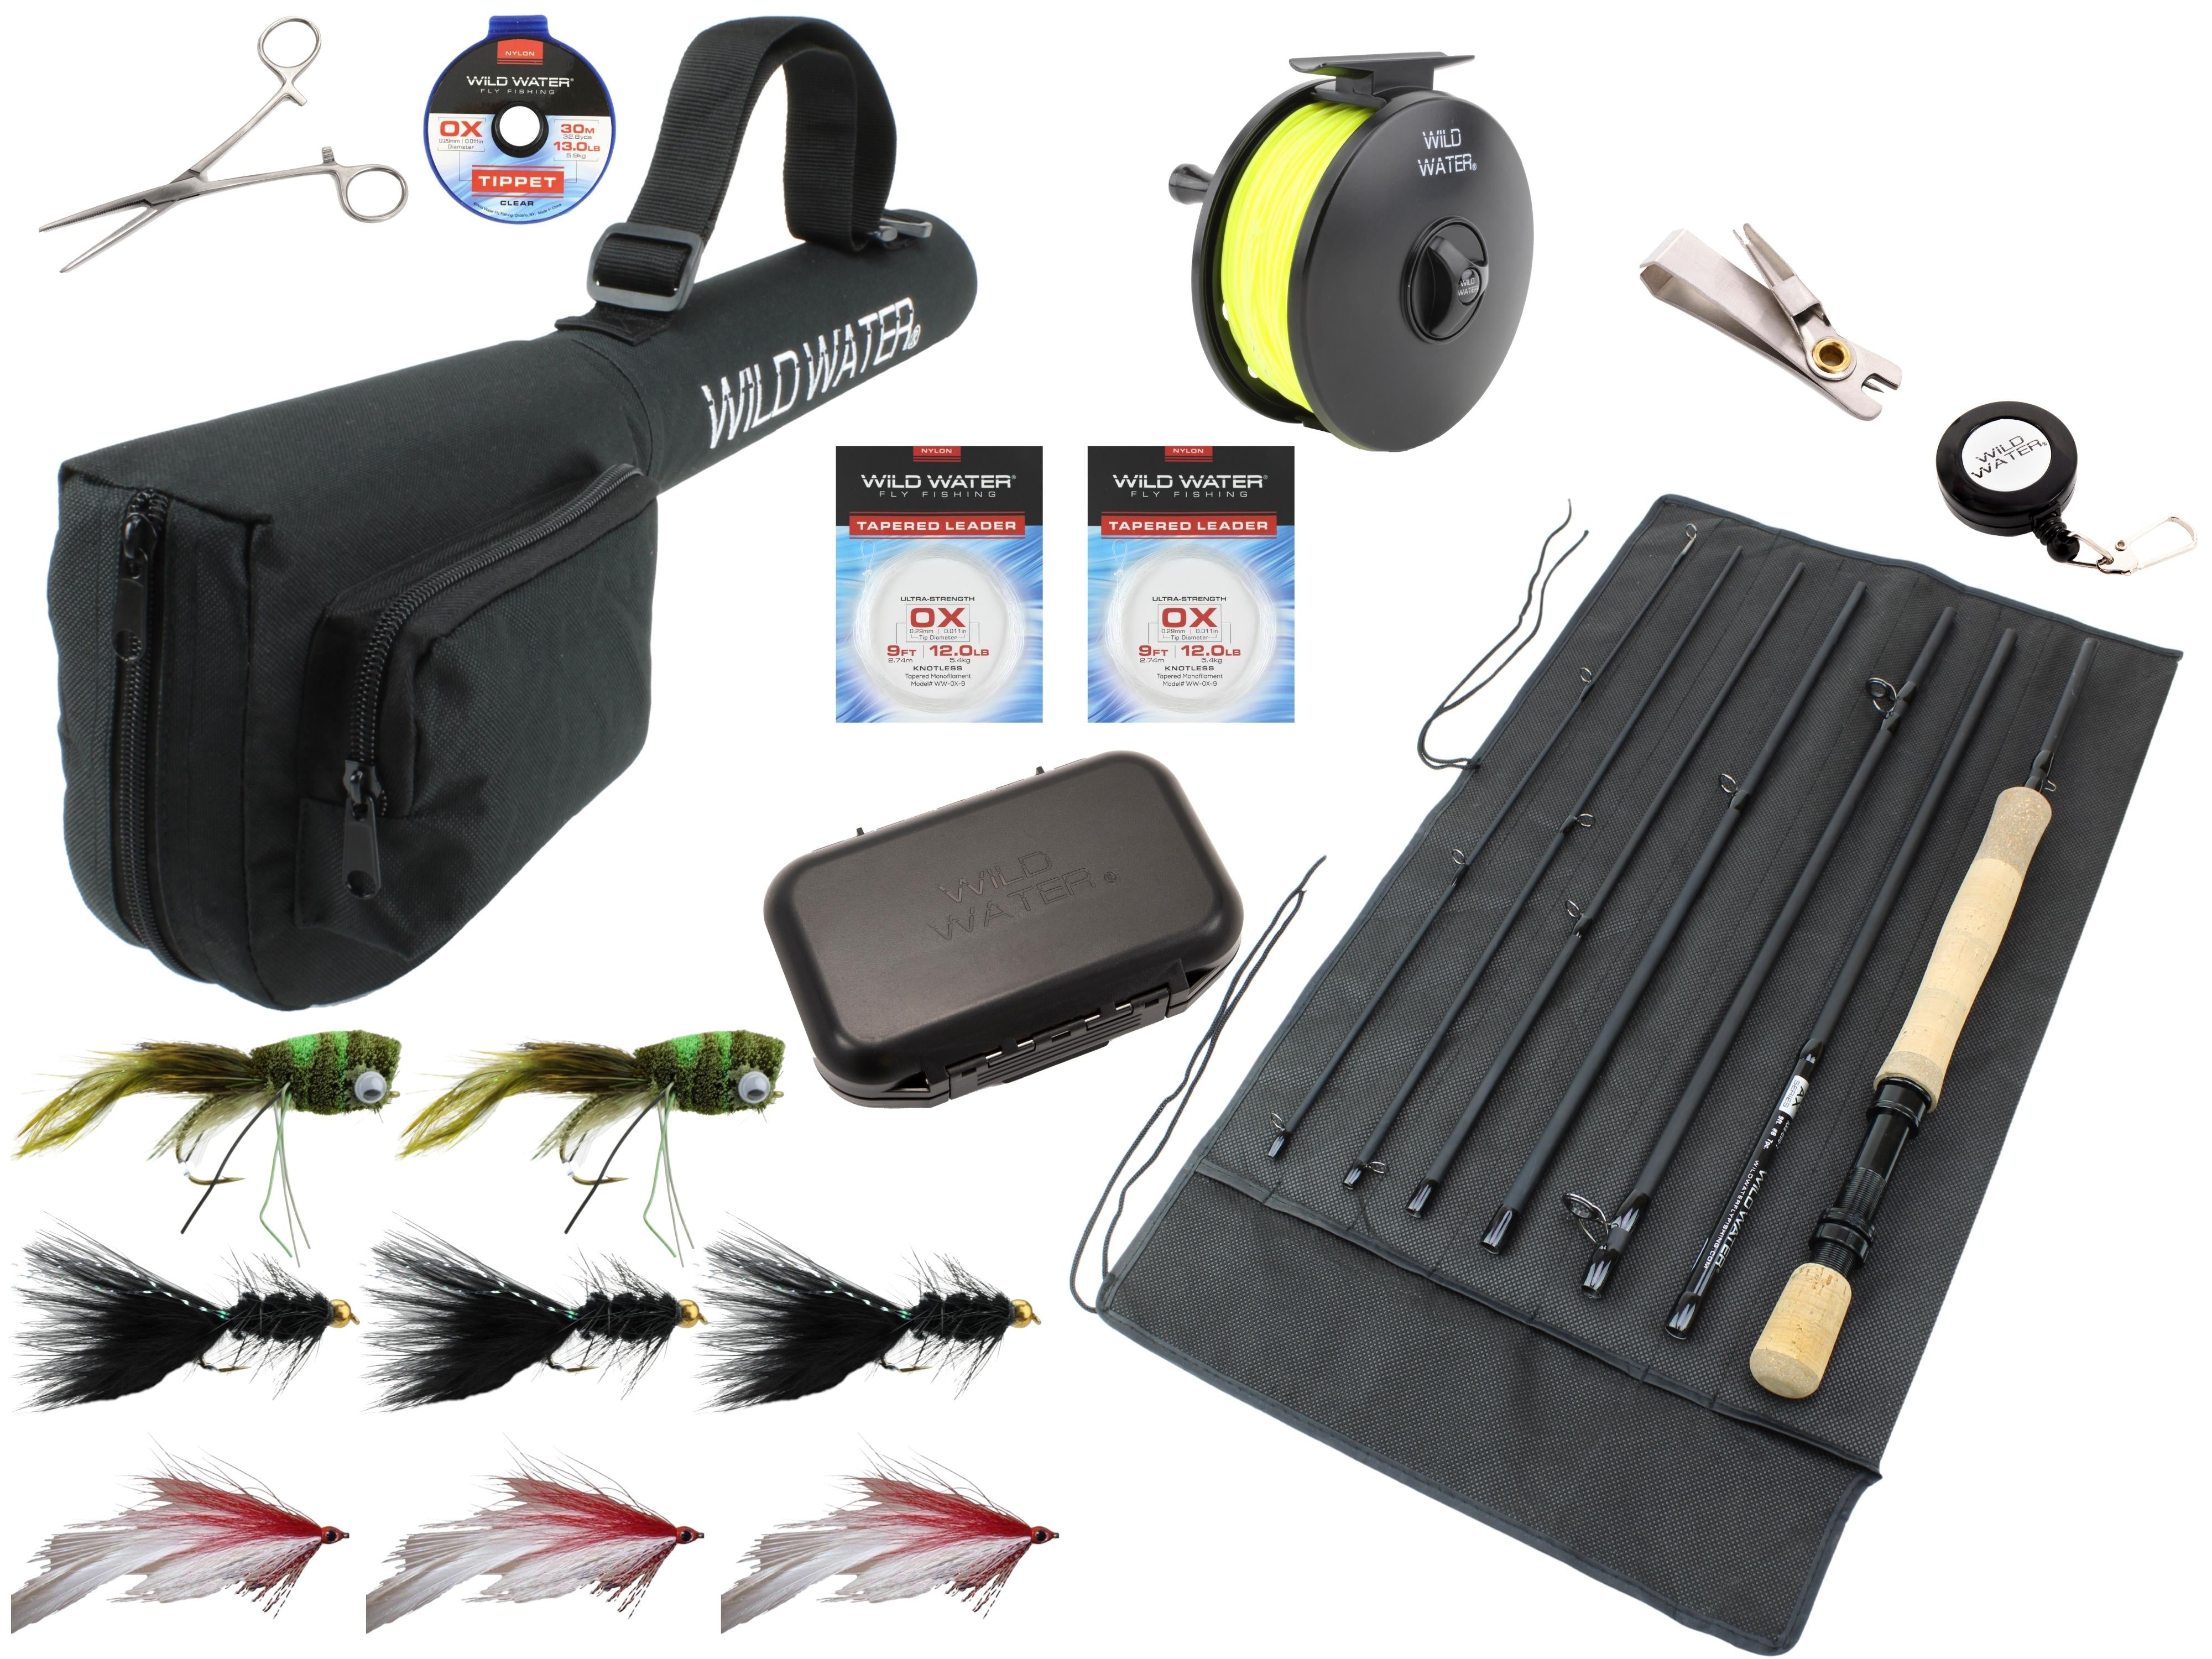 Wild Water Deluxe Freshwater Fly Fishing Combo, 9 ft 8 wt 7 Piece Rod